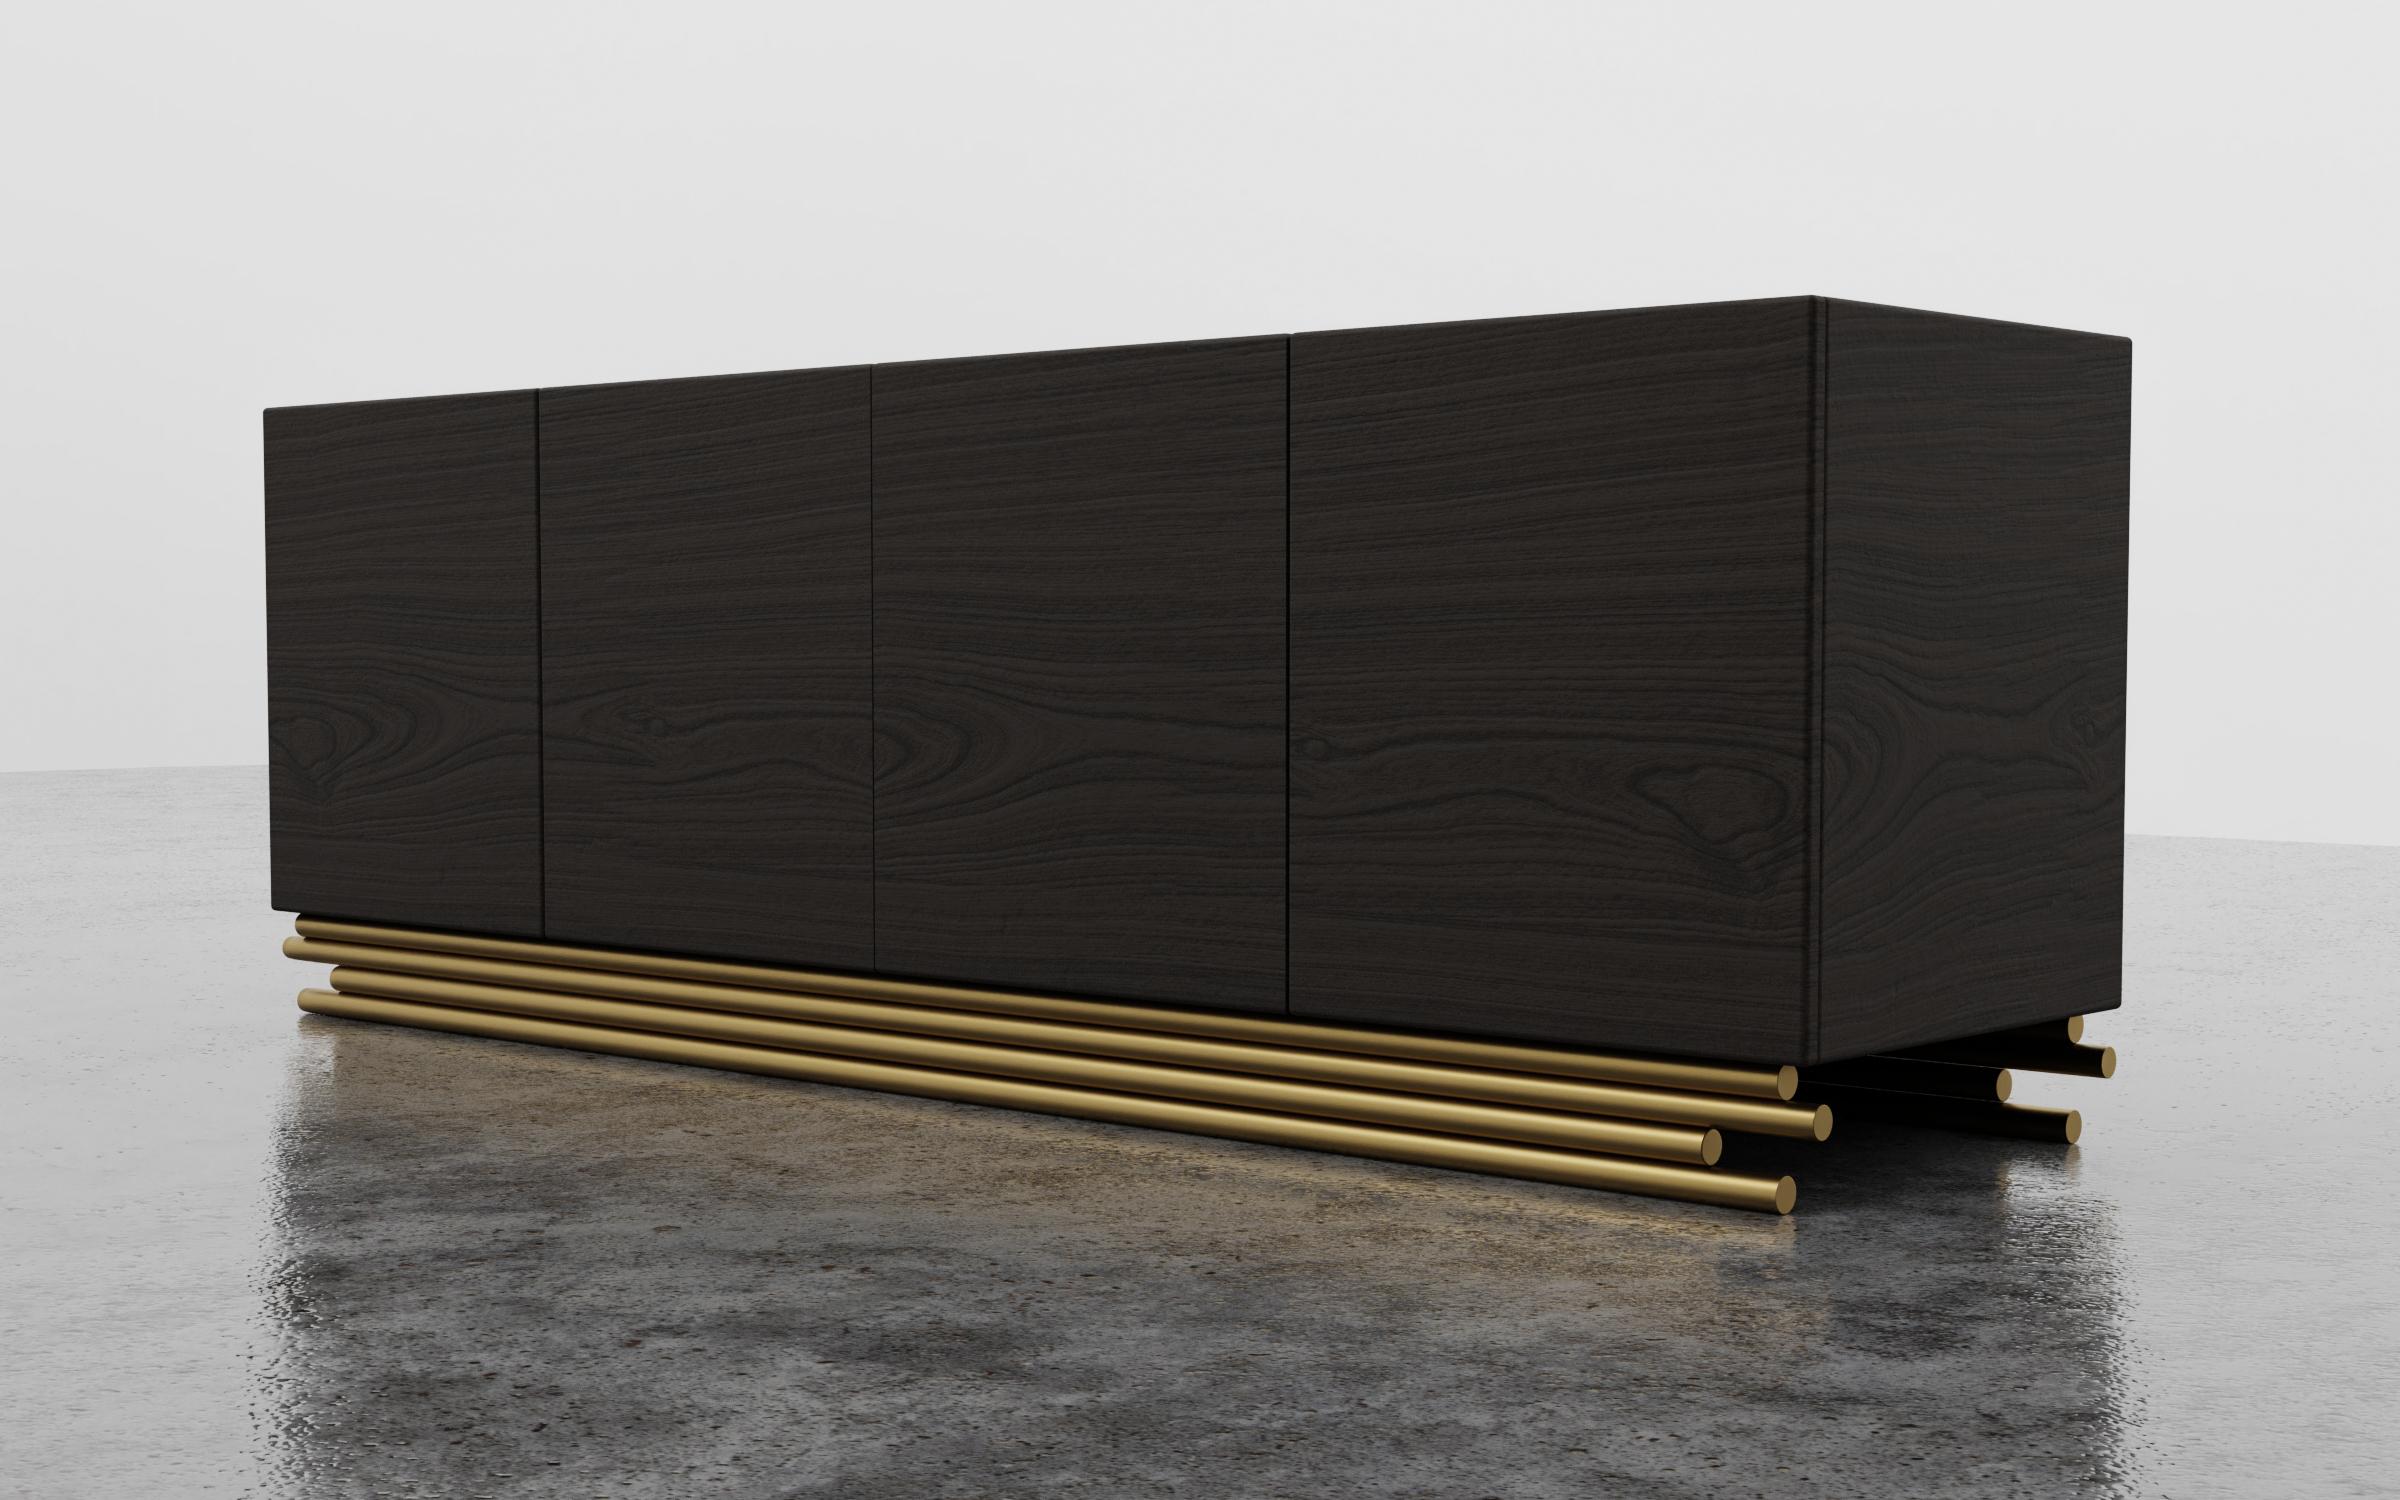 TRESTLES CREDENZA - Modern Ebony Walnut Cabinet with Metallic Lacquer Metal Base

The Trestles Credenza is a beautifully crafted piece of furniture that combines clean modern lines with a touch of sculptural elegance. Its sleek design features a